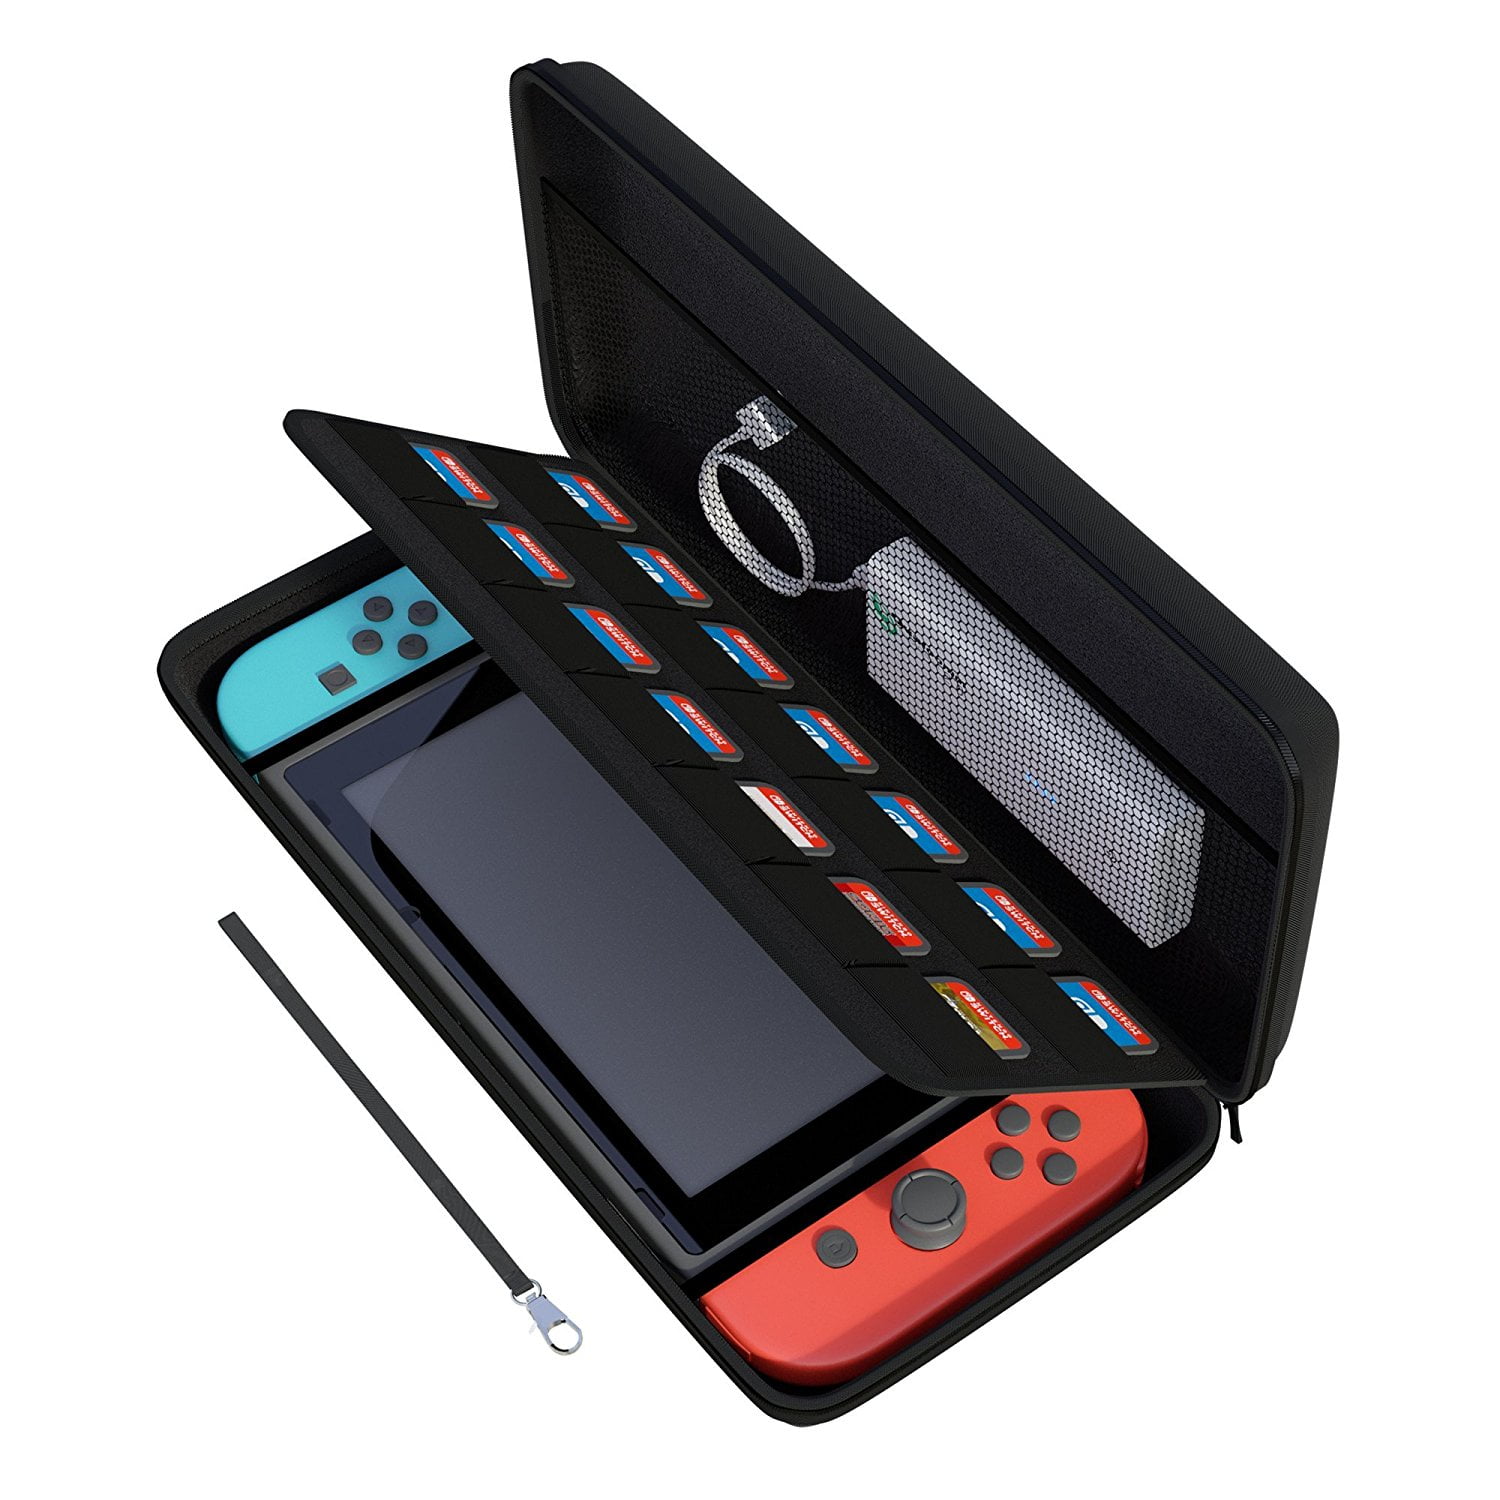 nintendo switch with case